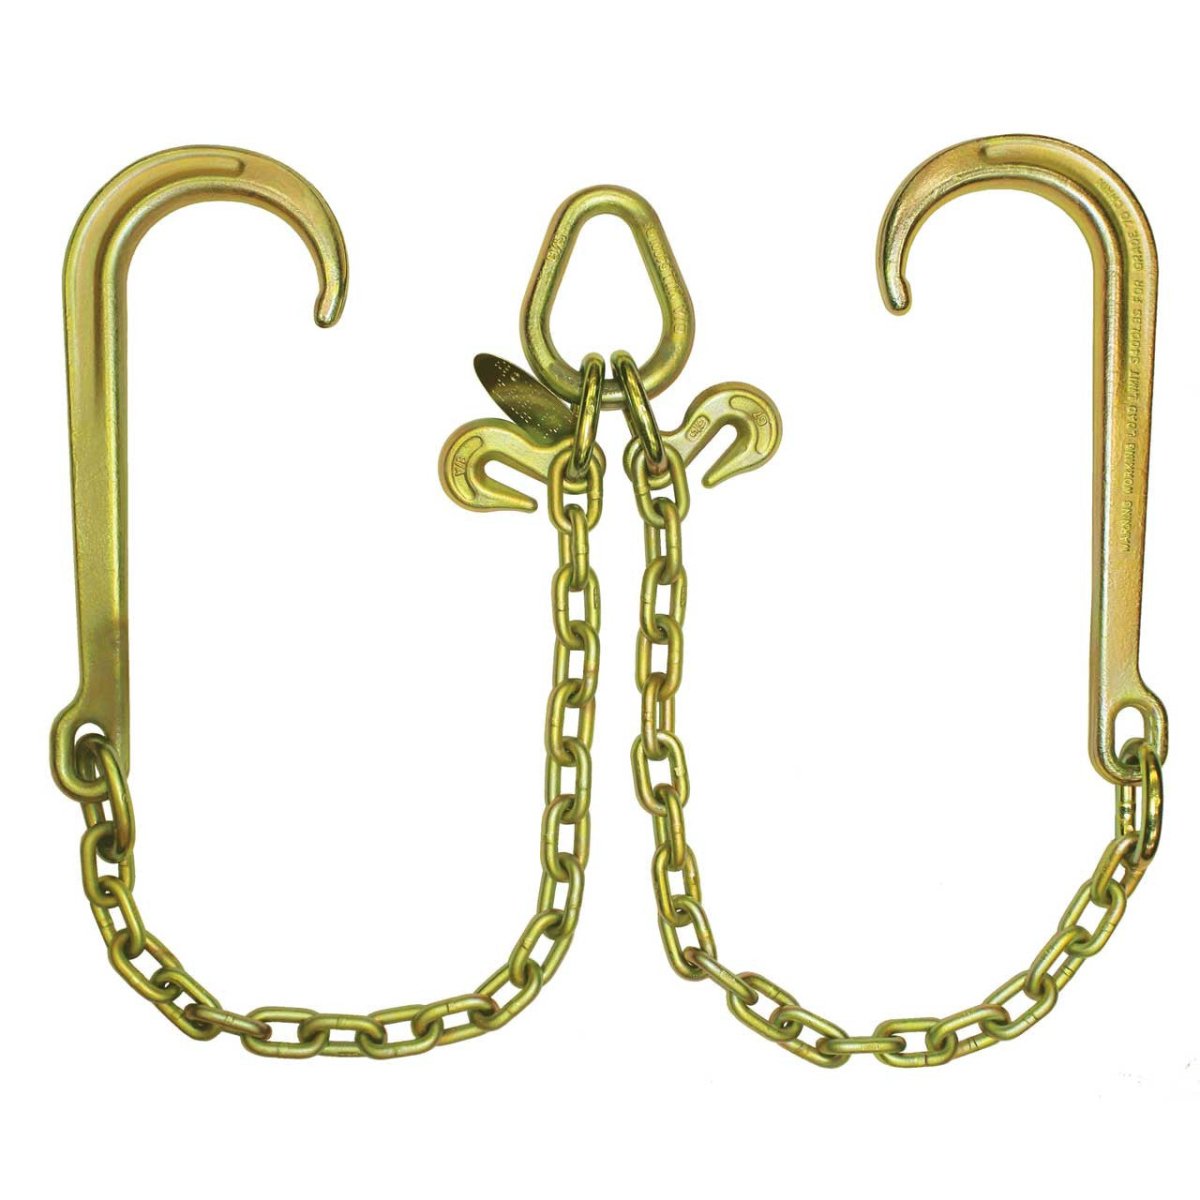 B/A Products Co. 5/16" x 2' Grade 70 15" Classic Style J Hook V-Chain - Z11-8 - starequipmentsales